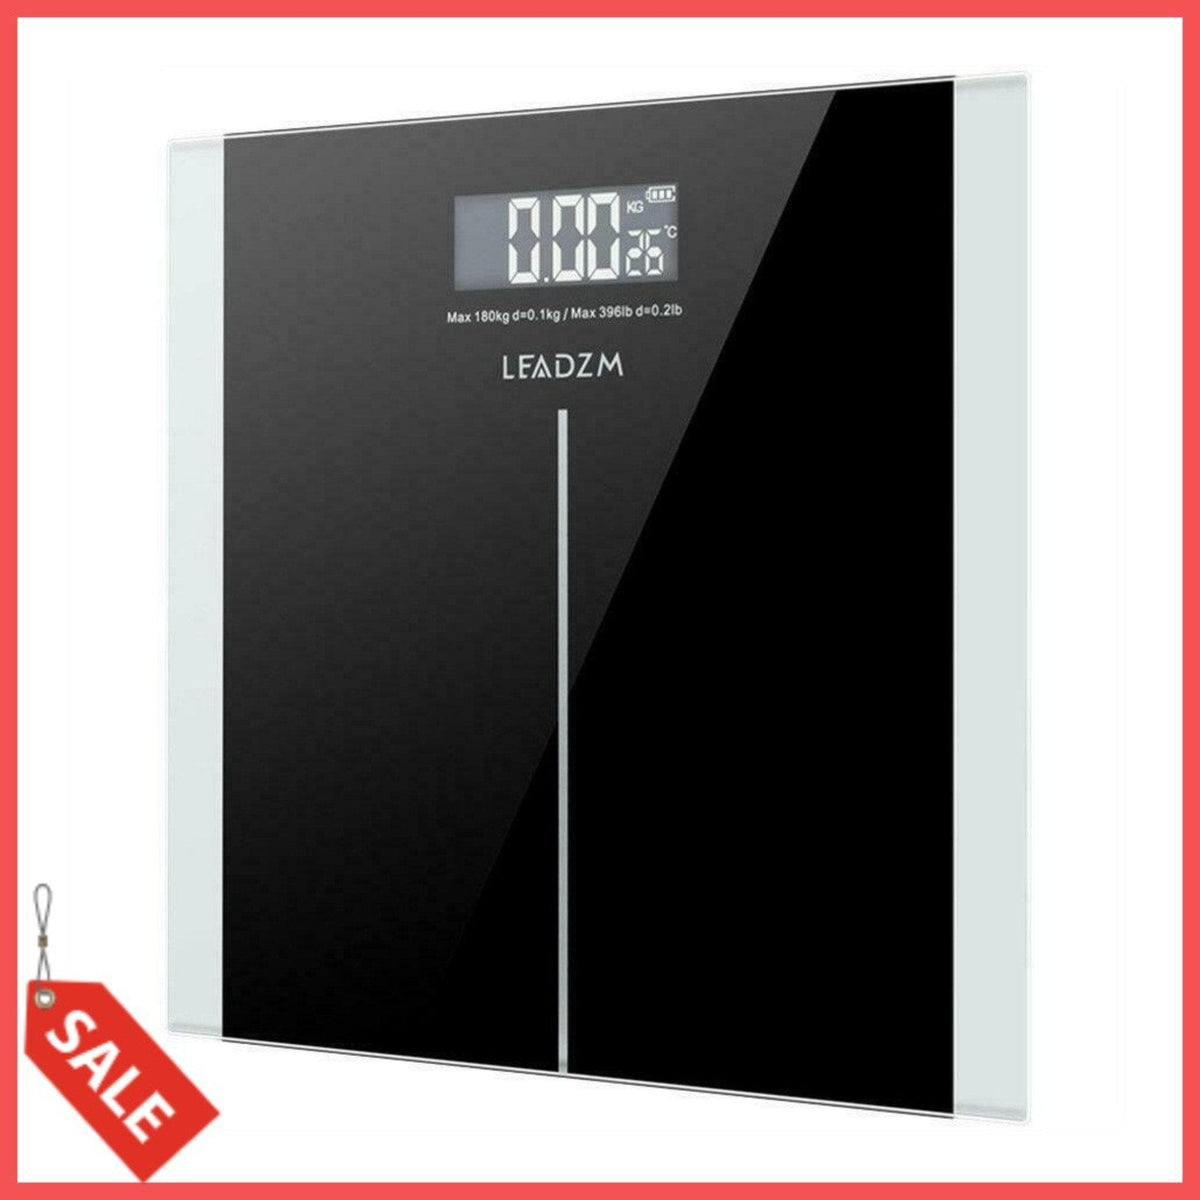 Digital Body Weight Bathroom Scale - Home & Kitchen - Woot